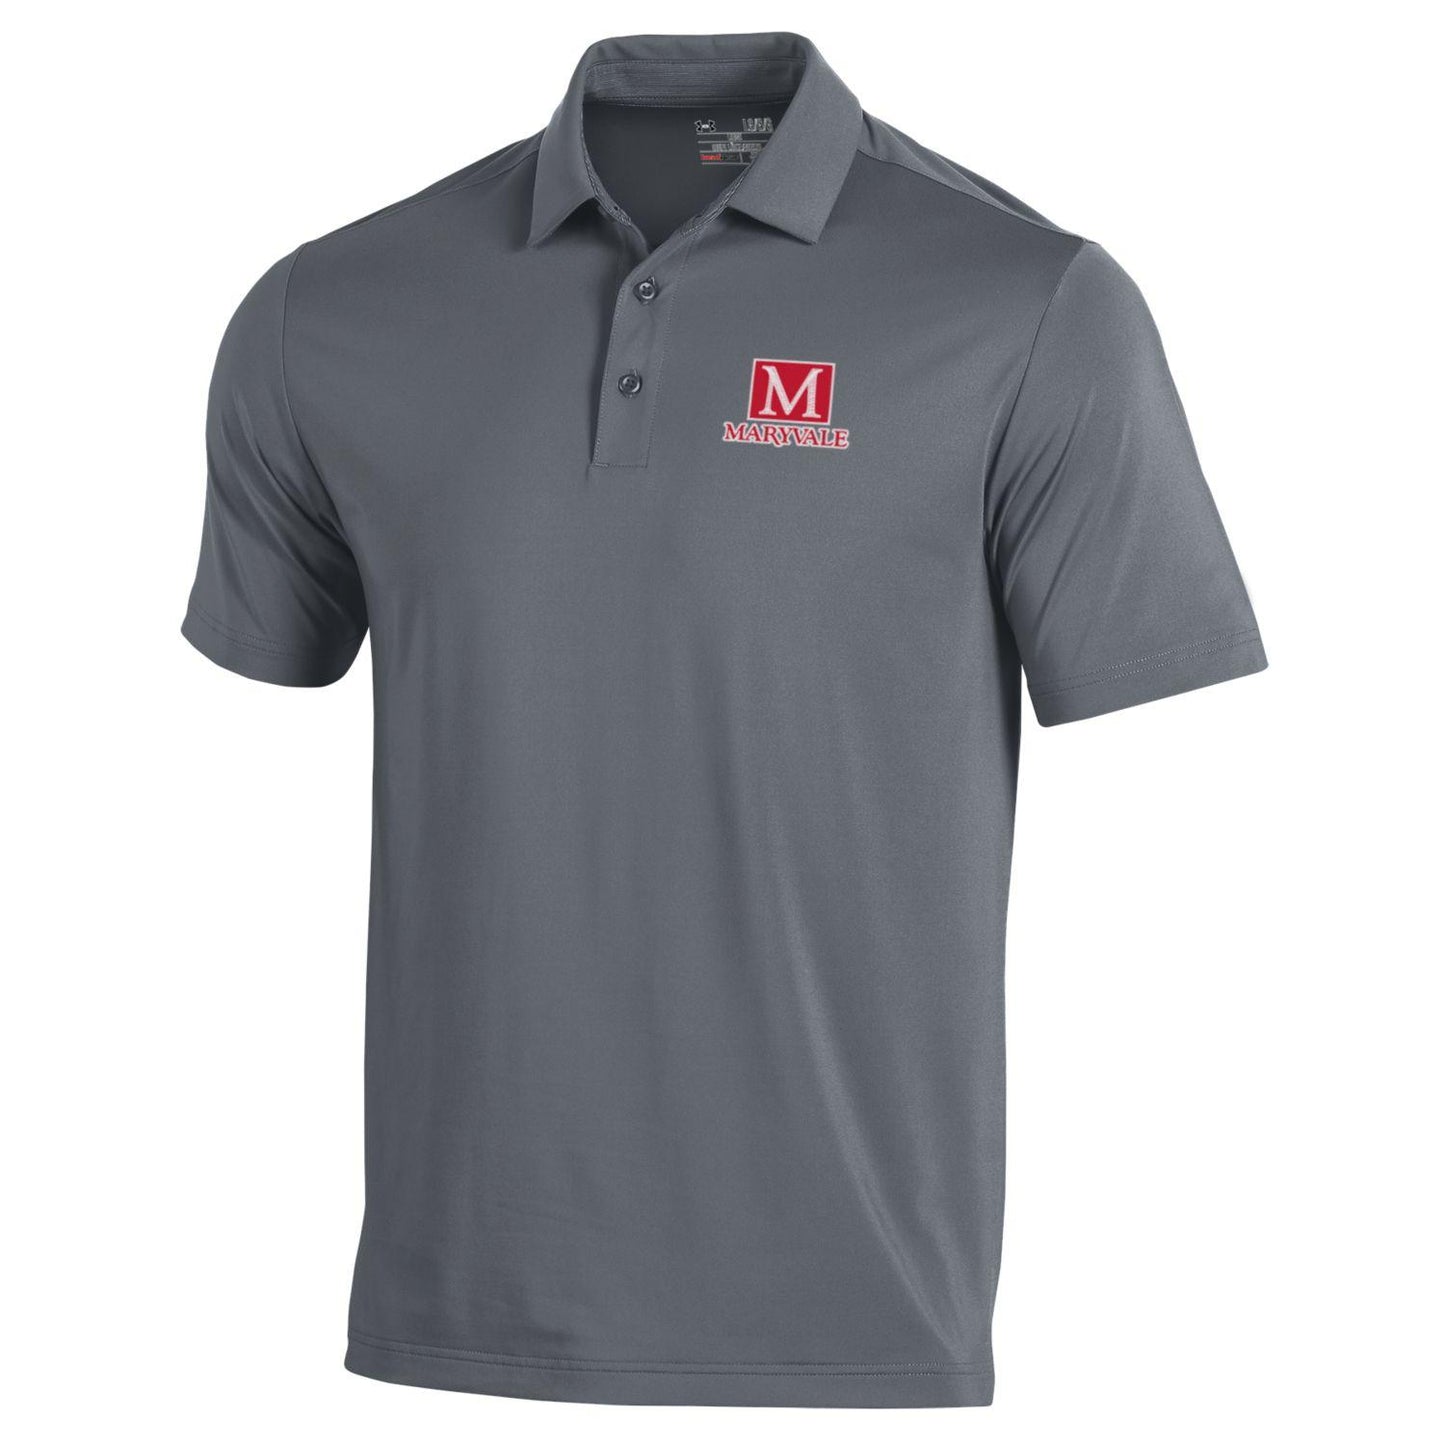 Men's Golf Polo by Under Armour